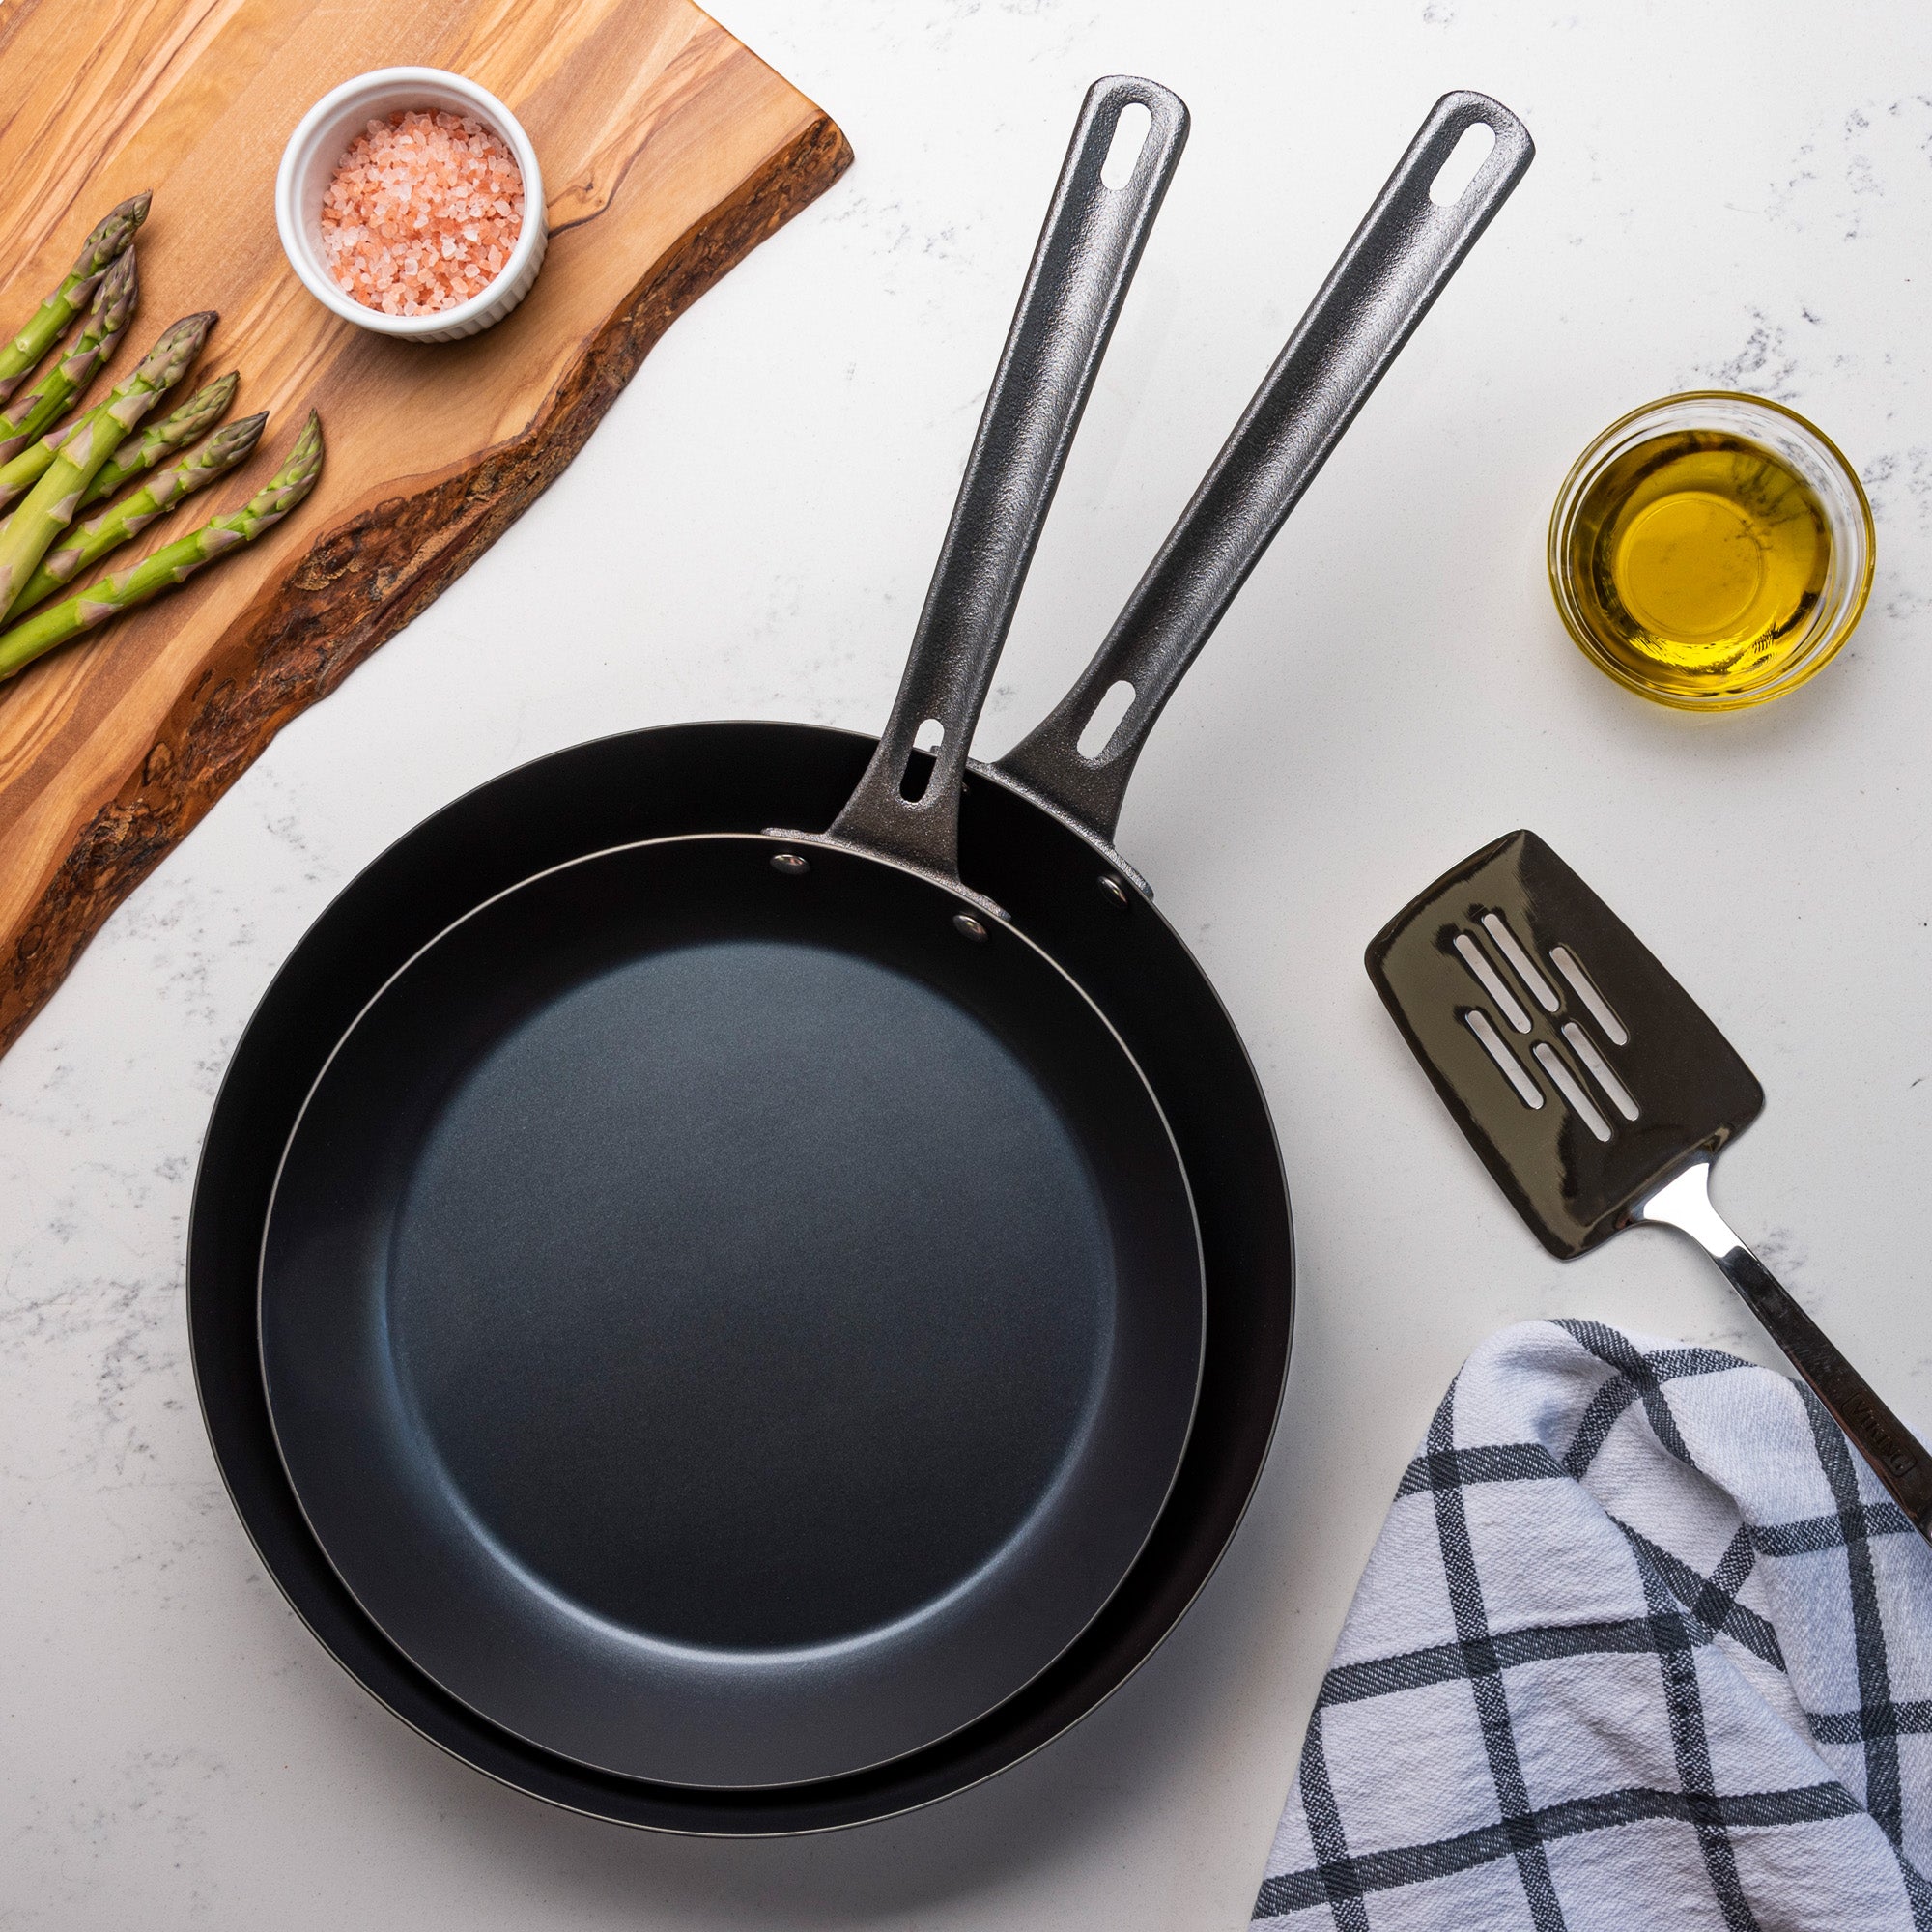  Made In Cookware - 10 Blue Carbon Steel Frying Pan